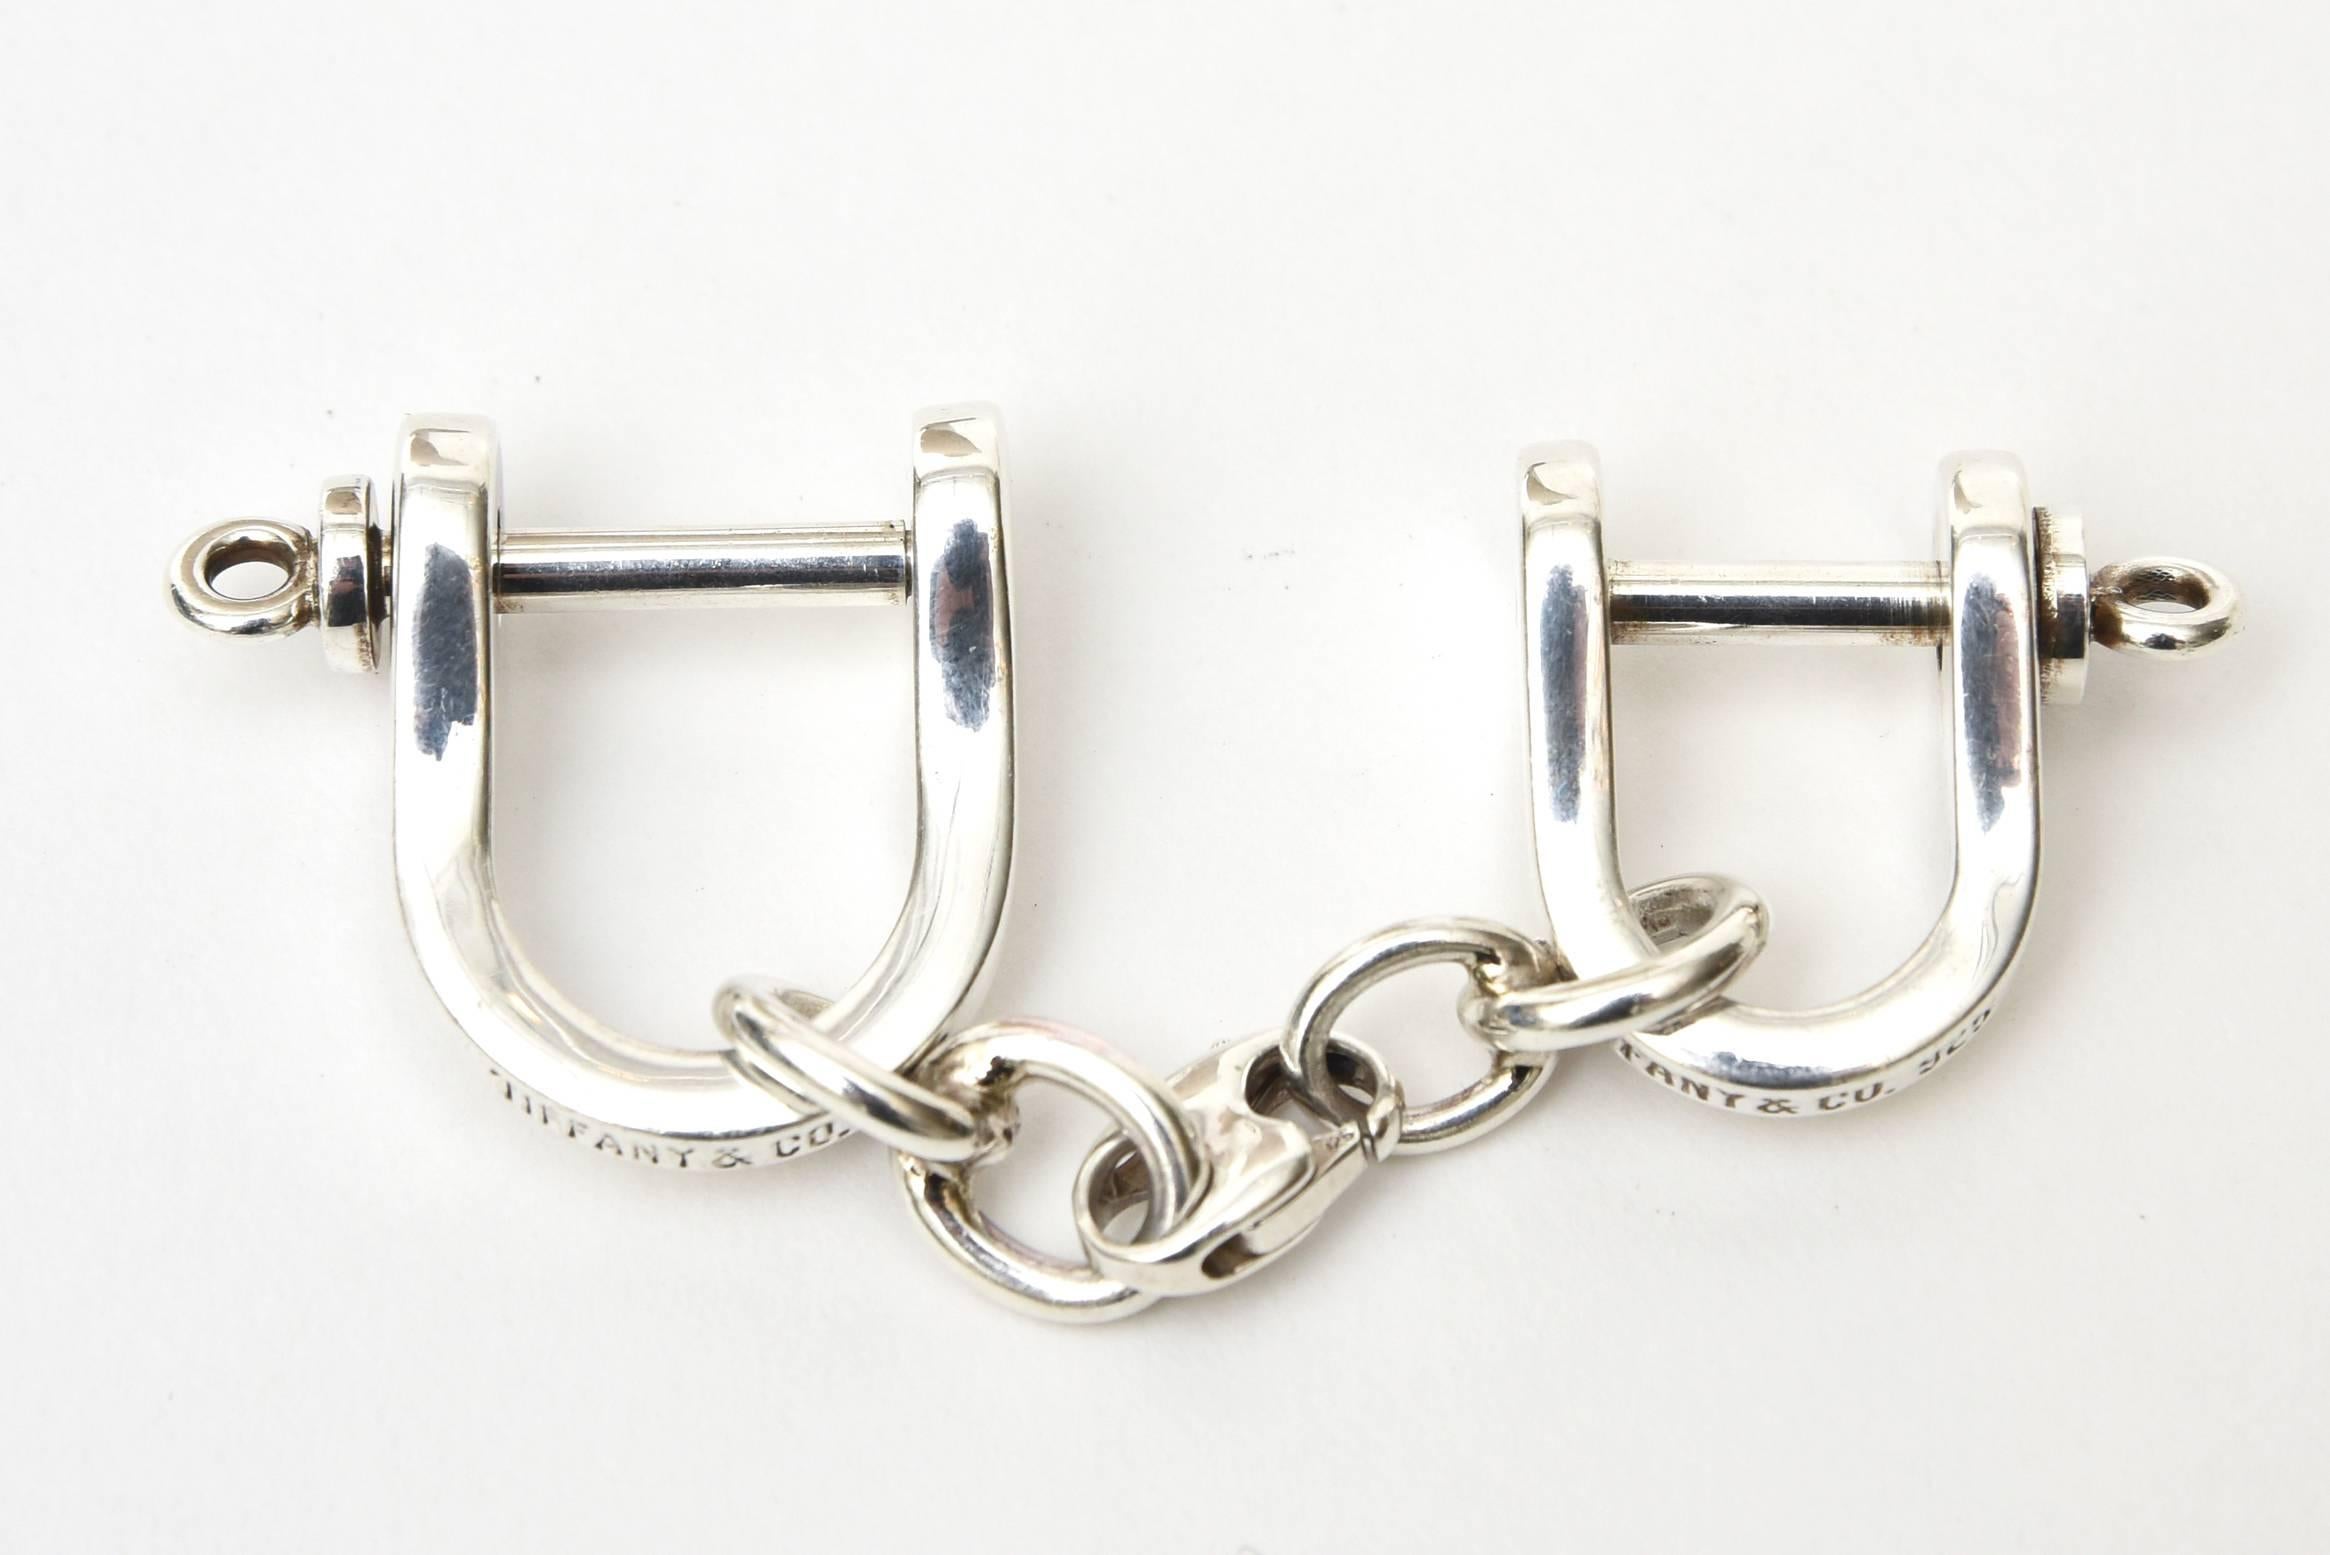 This now hard to come by hallmarked Tiffany sterling silver key chain has a detachable link for the valet. It is called Shackle and Hook. Marked Tiffany 925. These were produced in limited quantities even back in the 80's. The length with both ends